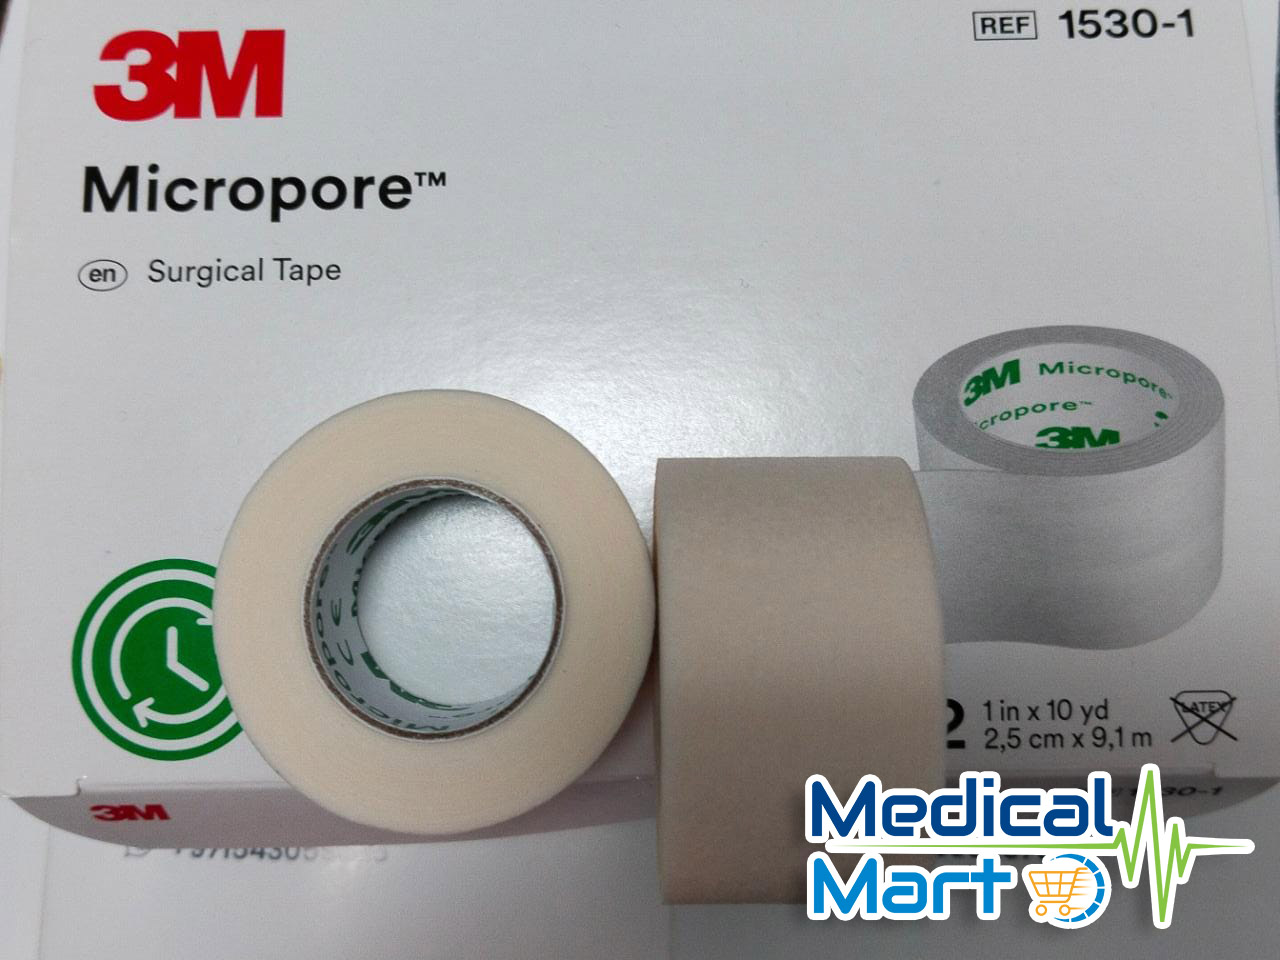 3m Micropore Paper Surgical Tape: 2.5cm x 9.14m (1in x 10yds)